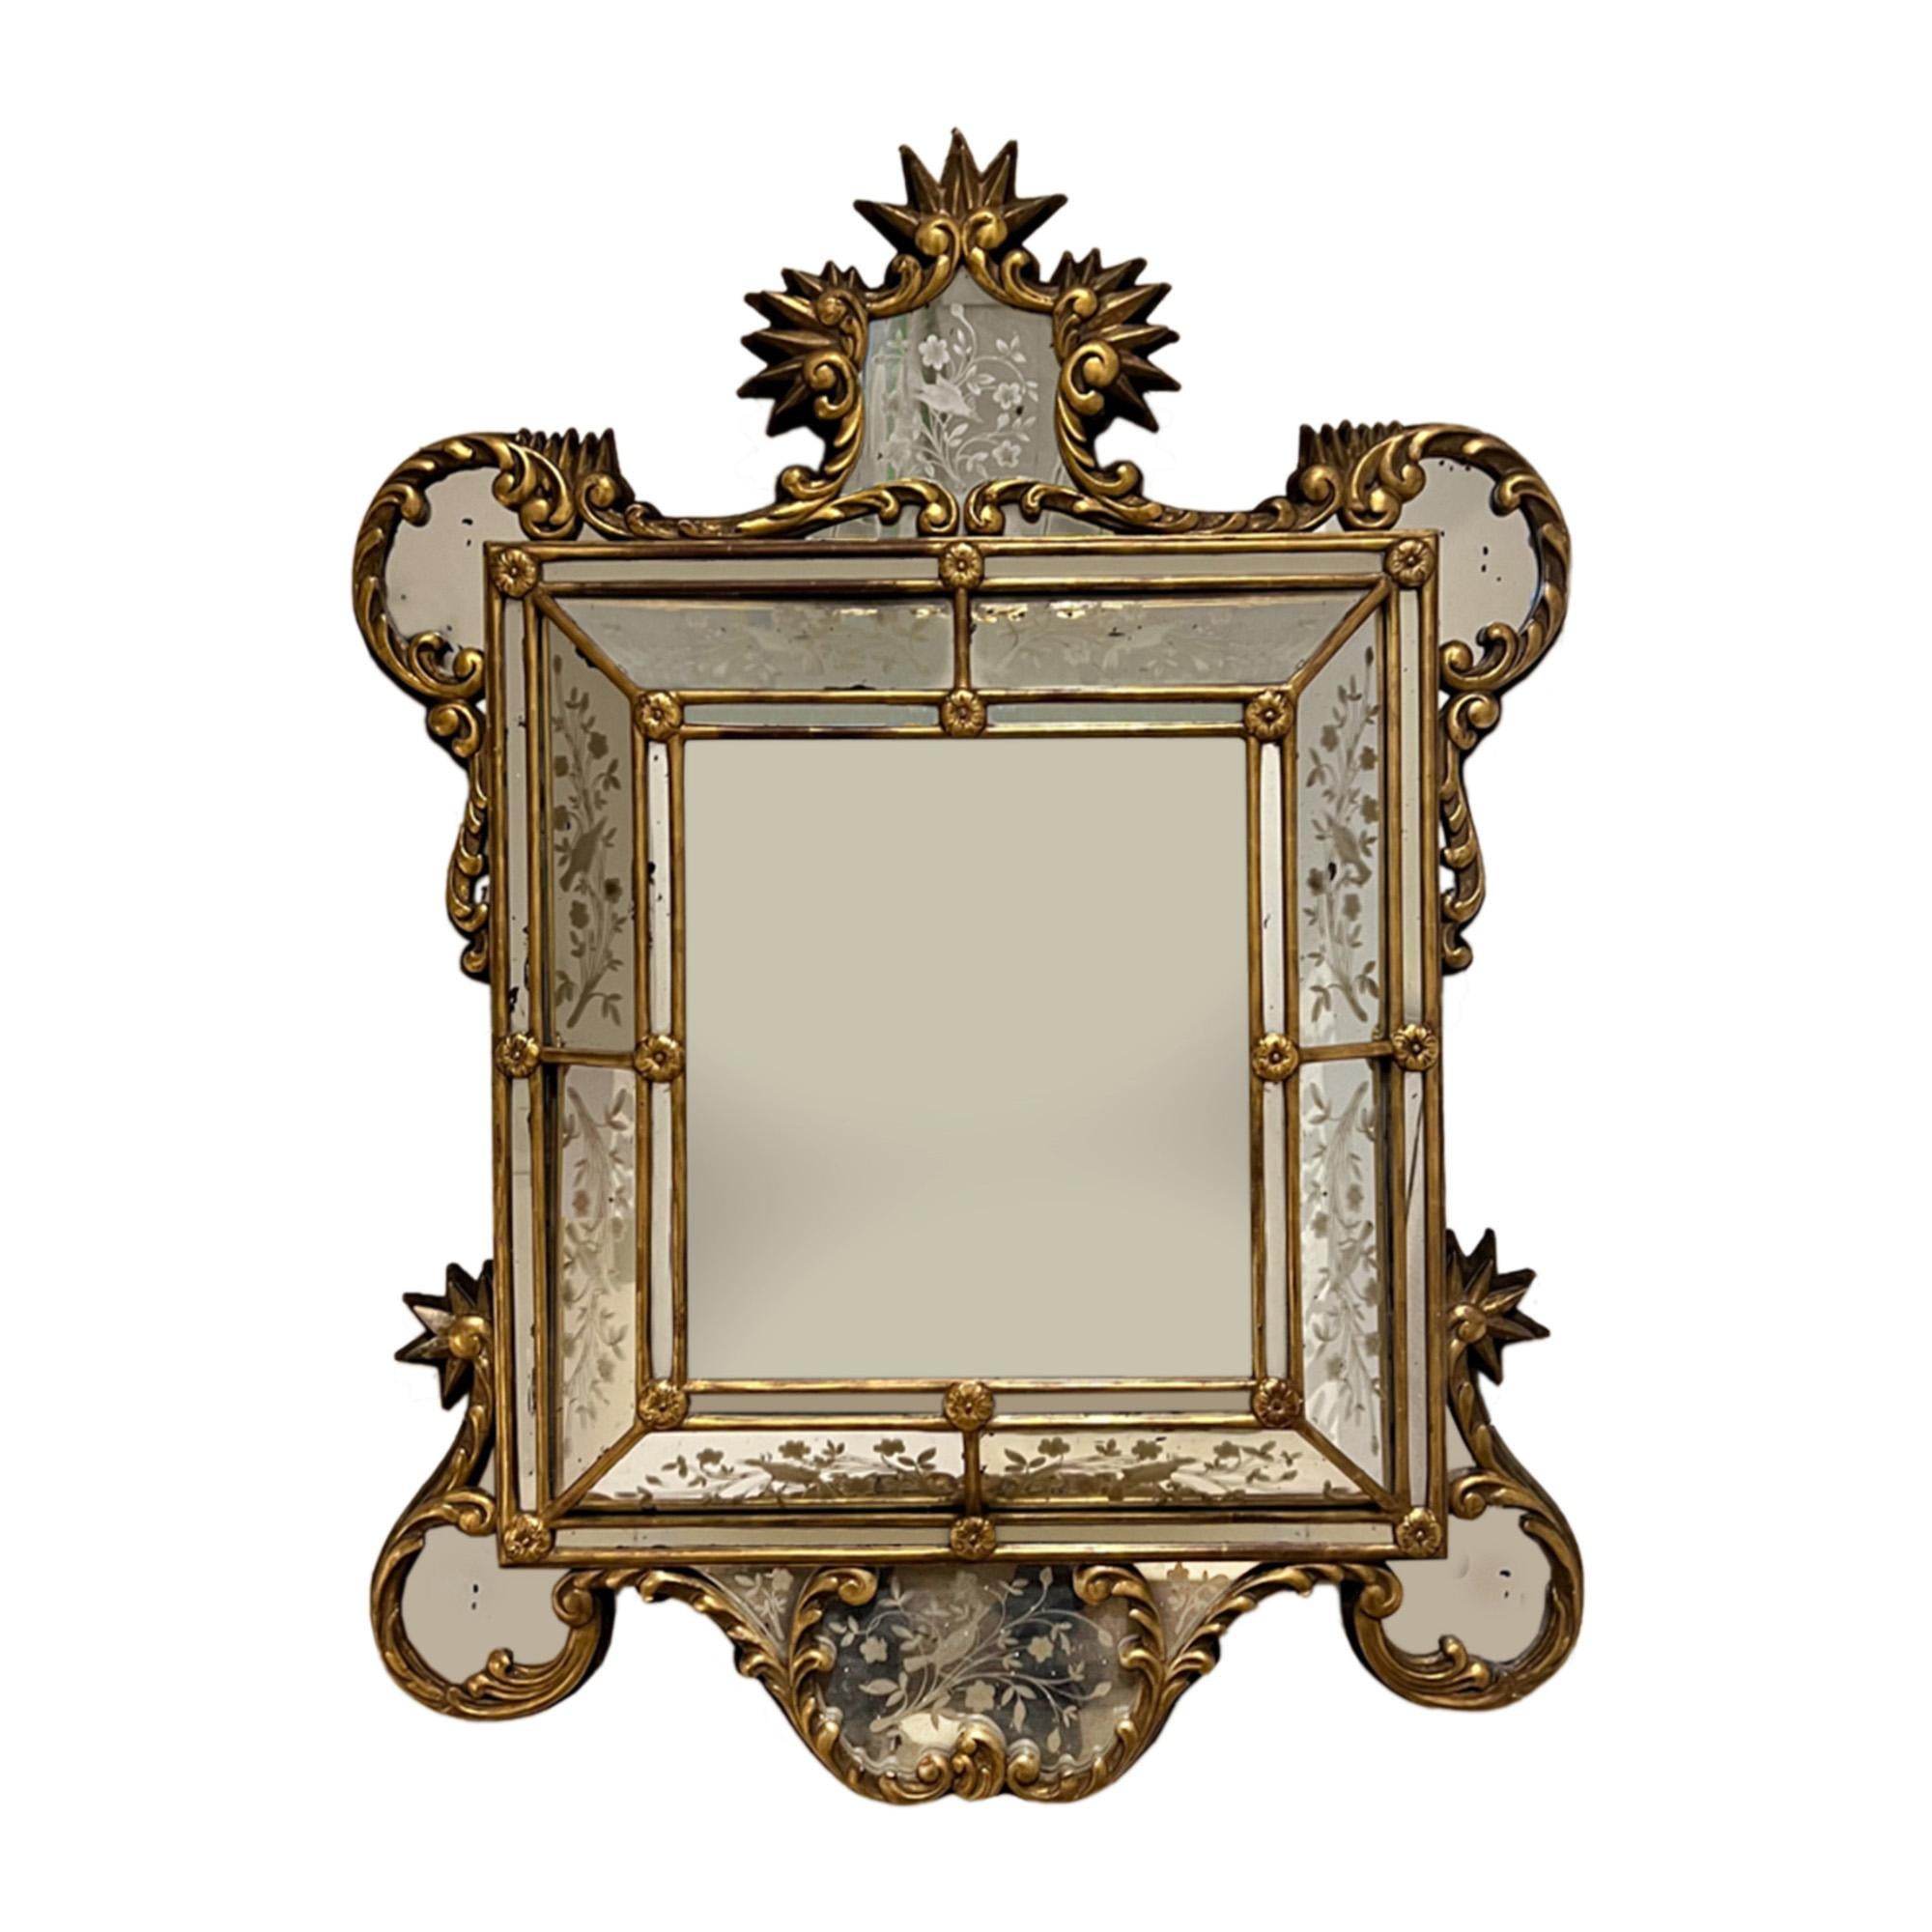 A really unusual cushion mirror, made in Italy in the second quarter of the 20th century. 

Crafted from giltwood, it has the original etched glass, with floral and avian detail. Please take a close look at all our photographs. 

Beautifully made